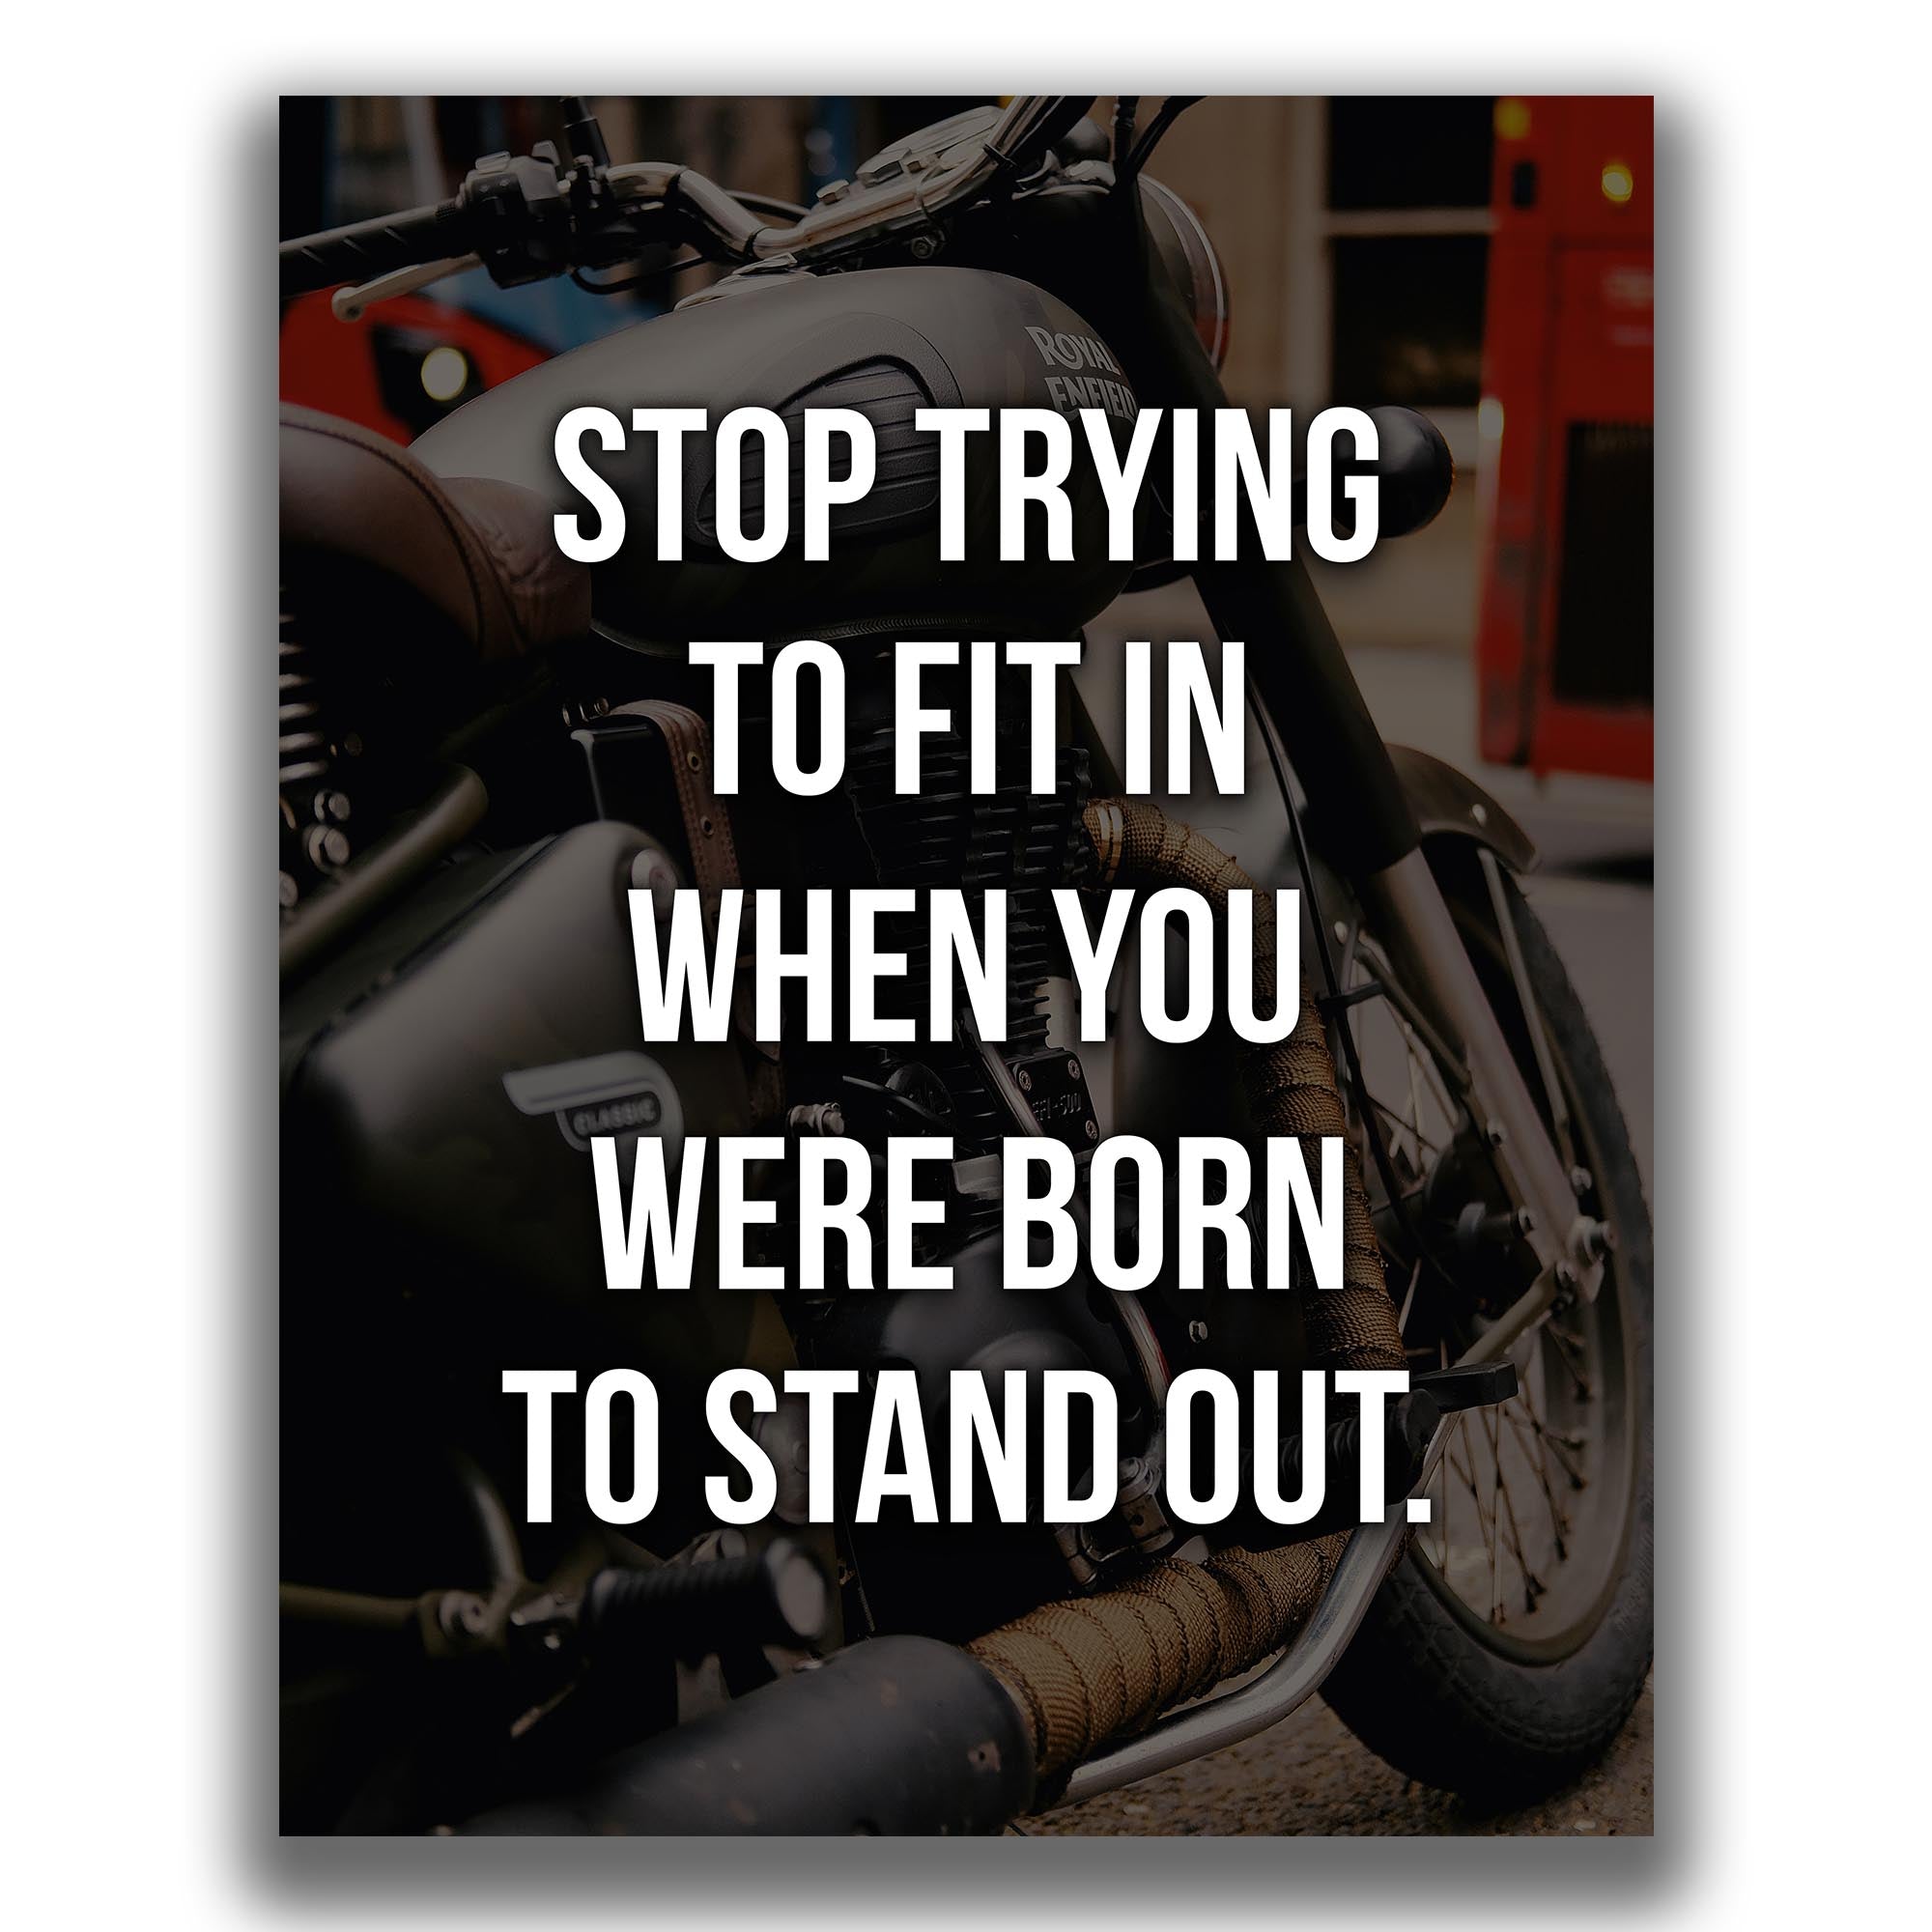 Success - Motorcycle Poster